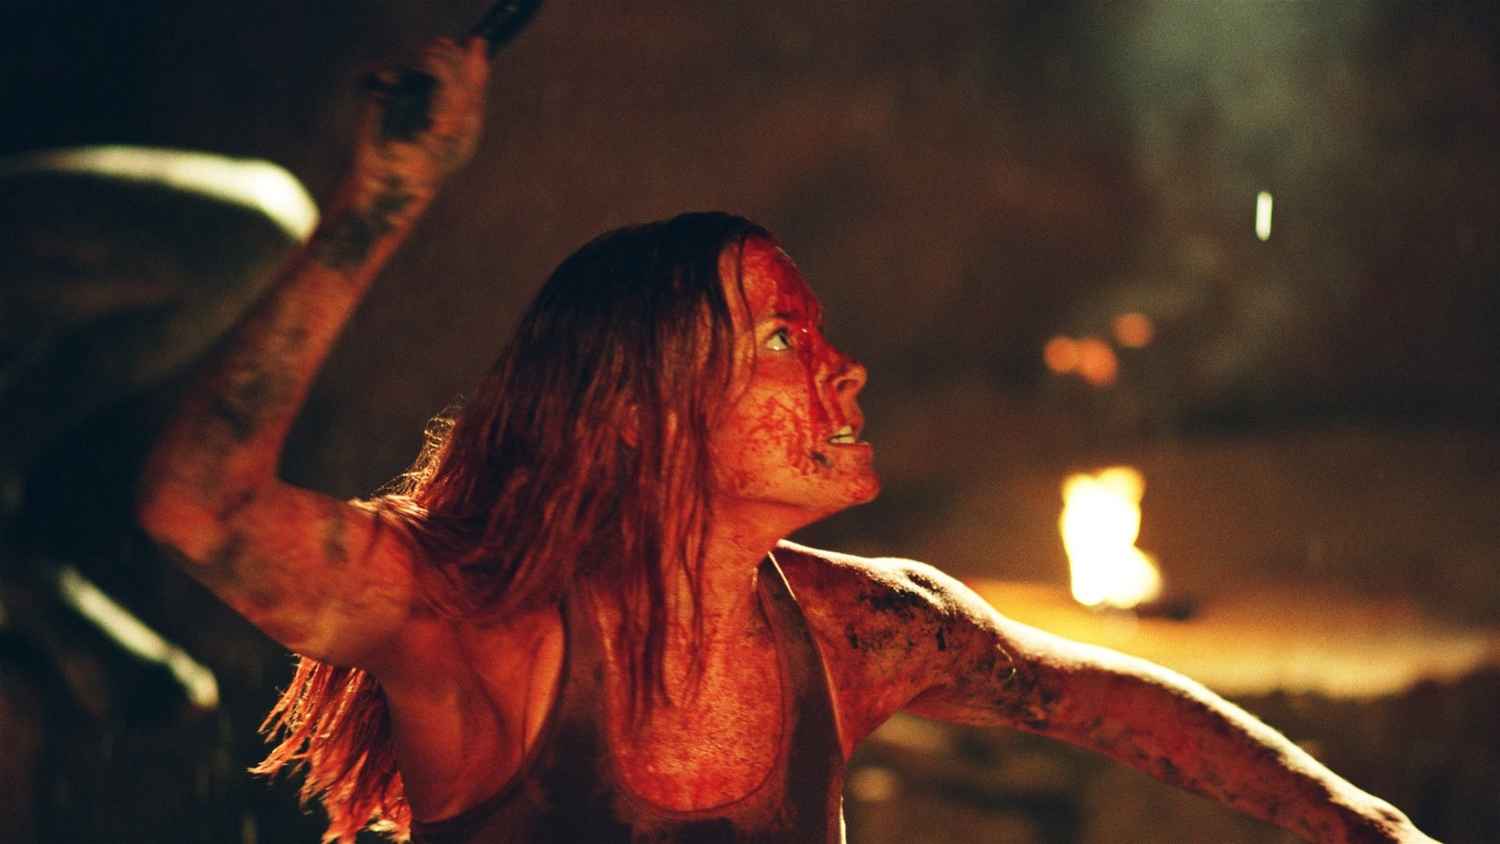 descent 2 full movie free streaming